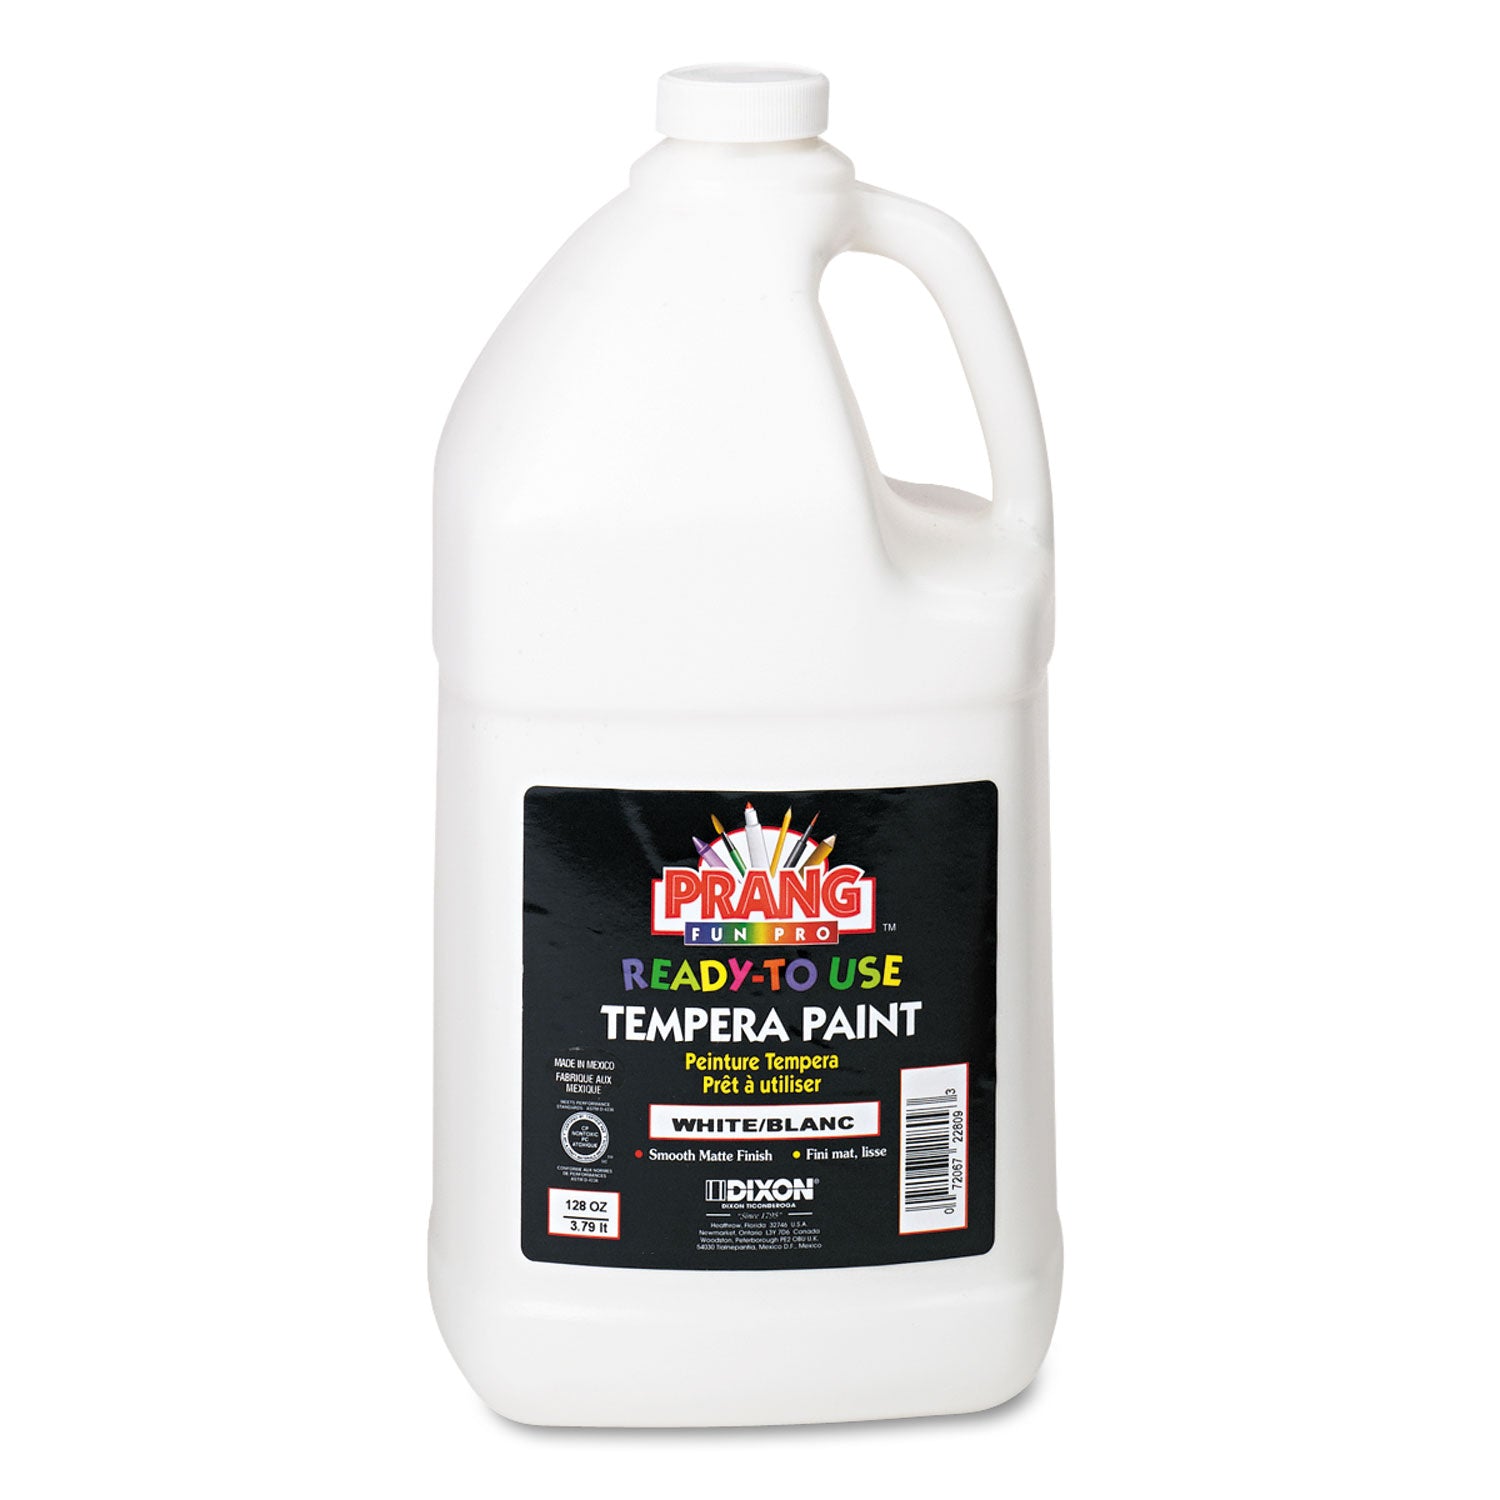 Ready-to-Use Tempera Paint, White, 1 gal Bottle - 